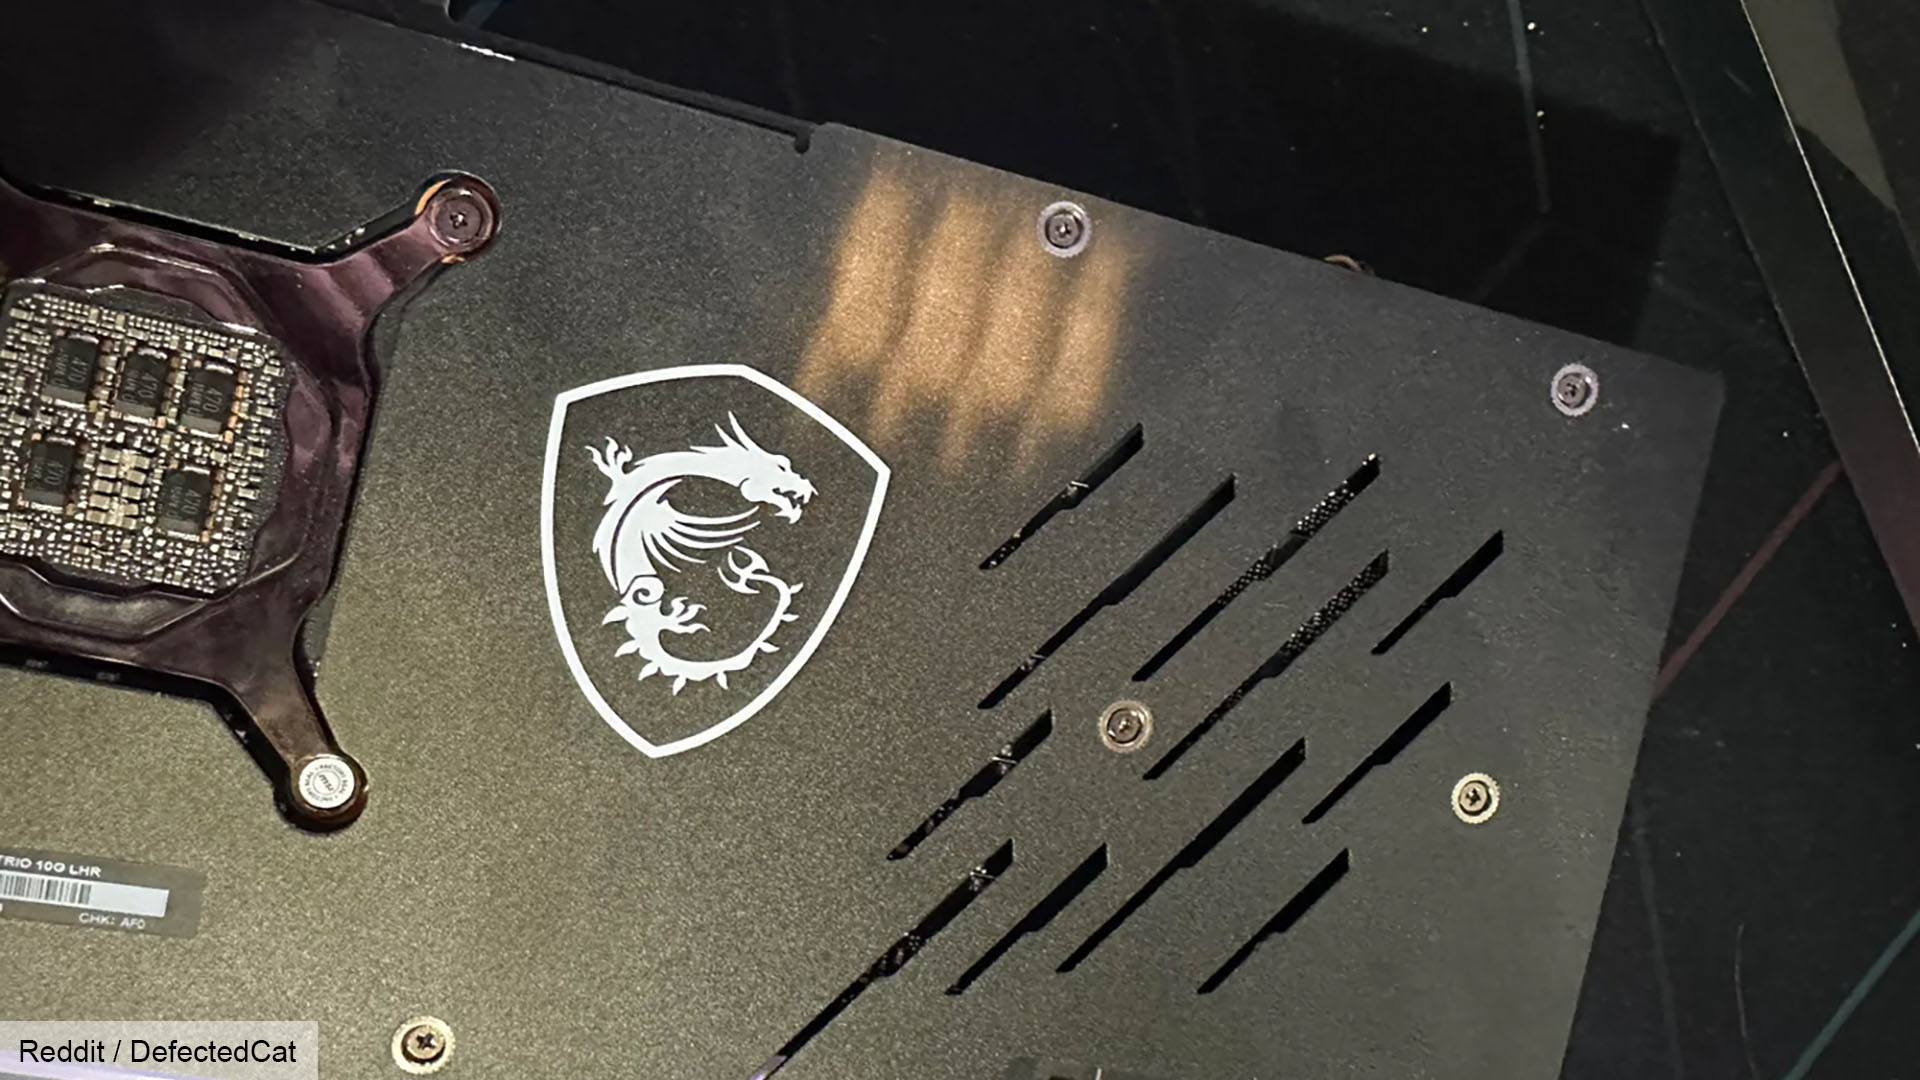 MSI Gaming X Trio RTX 3080 graphics card with RGB memory burn on backplate